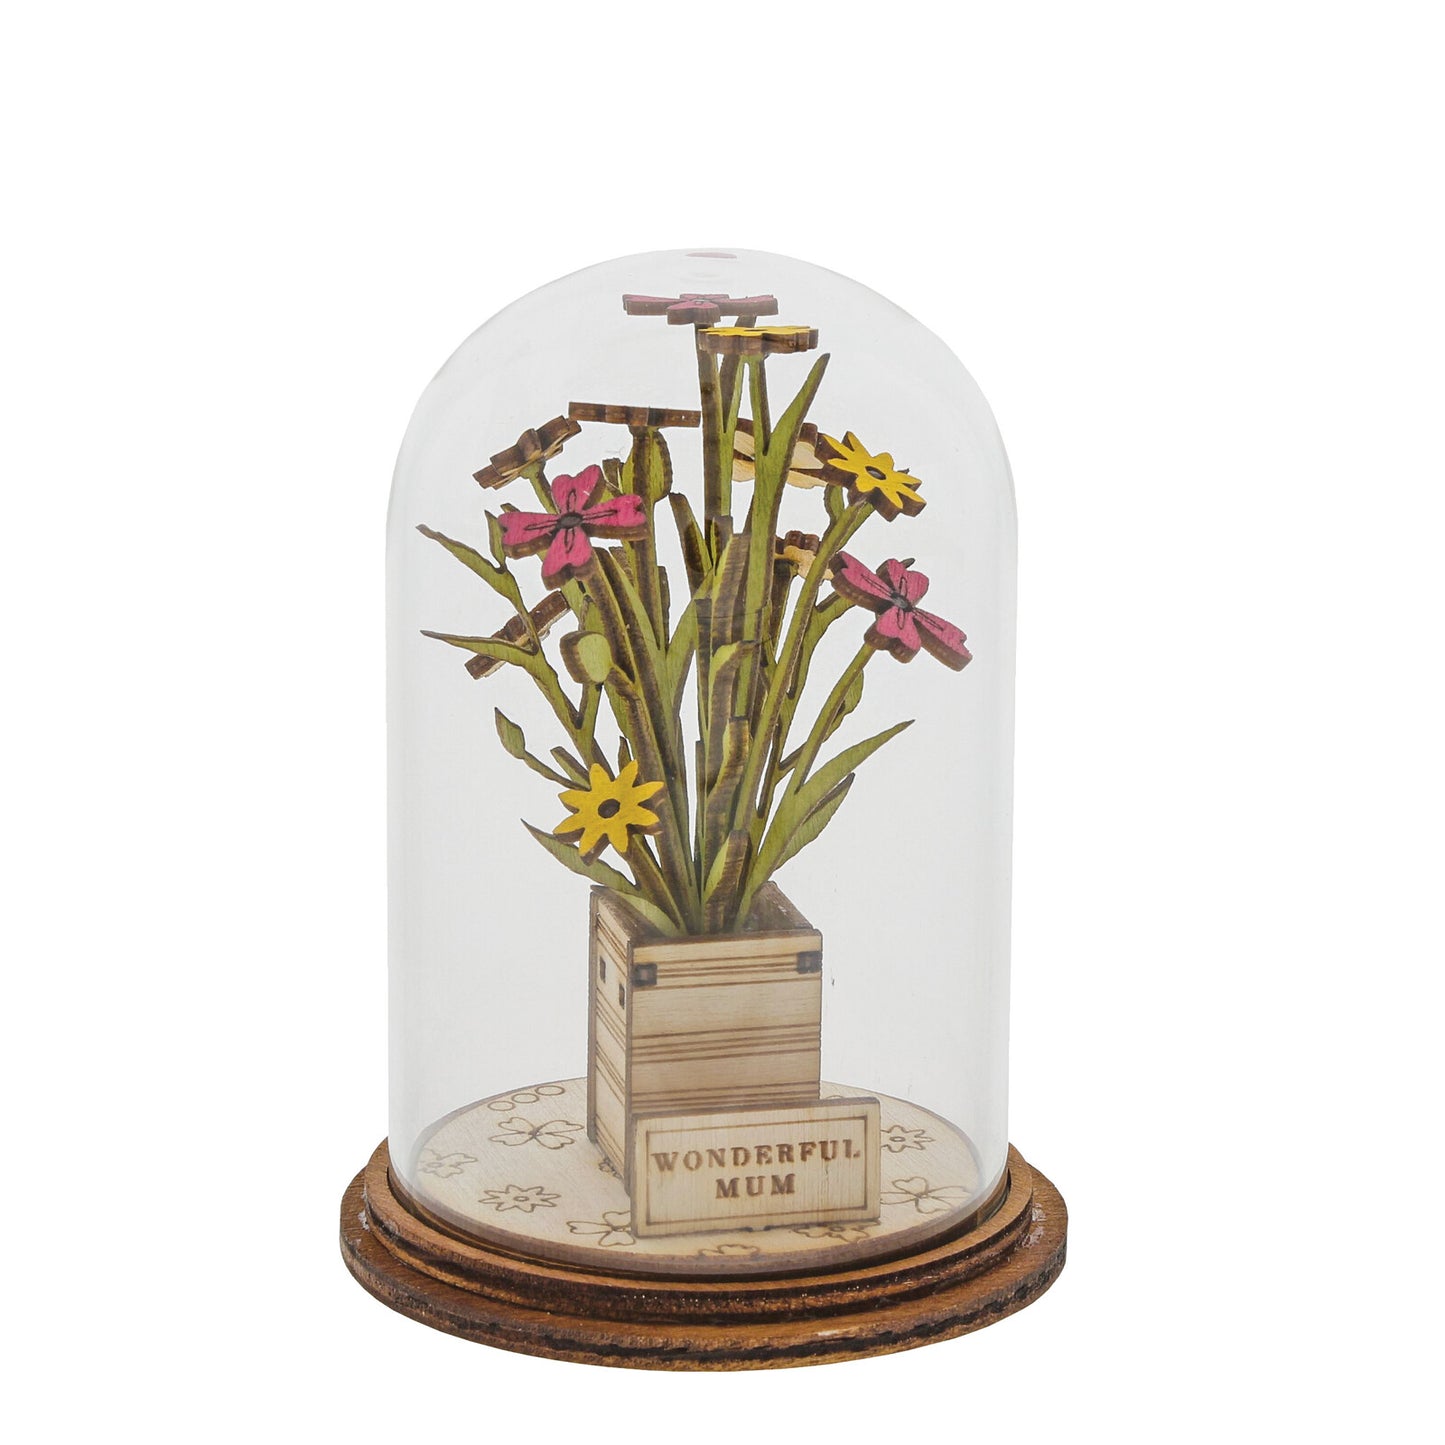 TINY TOWN WONDERFUL MUM FLOWER DOME FIGURINE - Gifts R Us